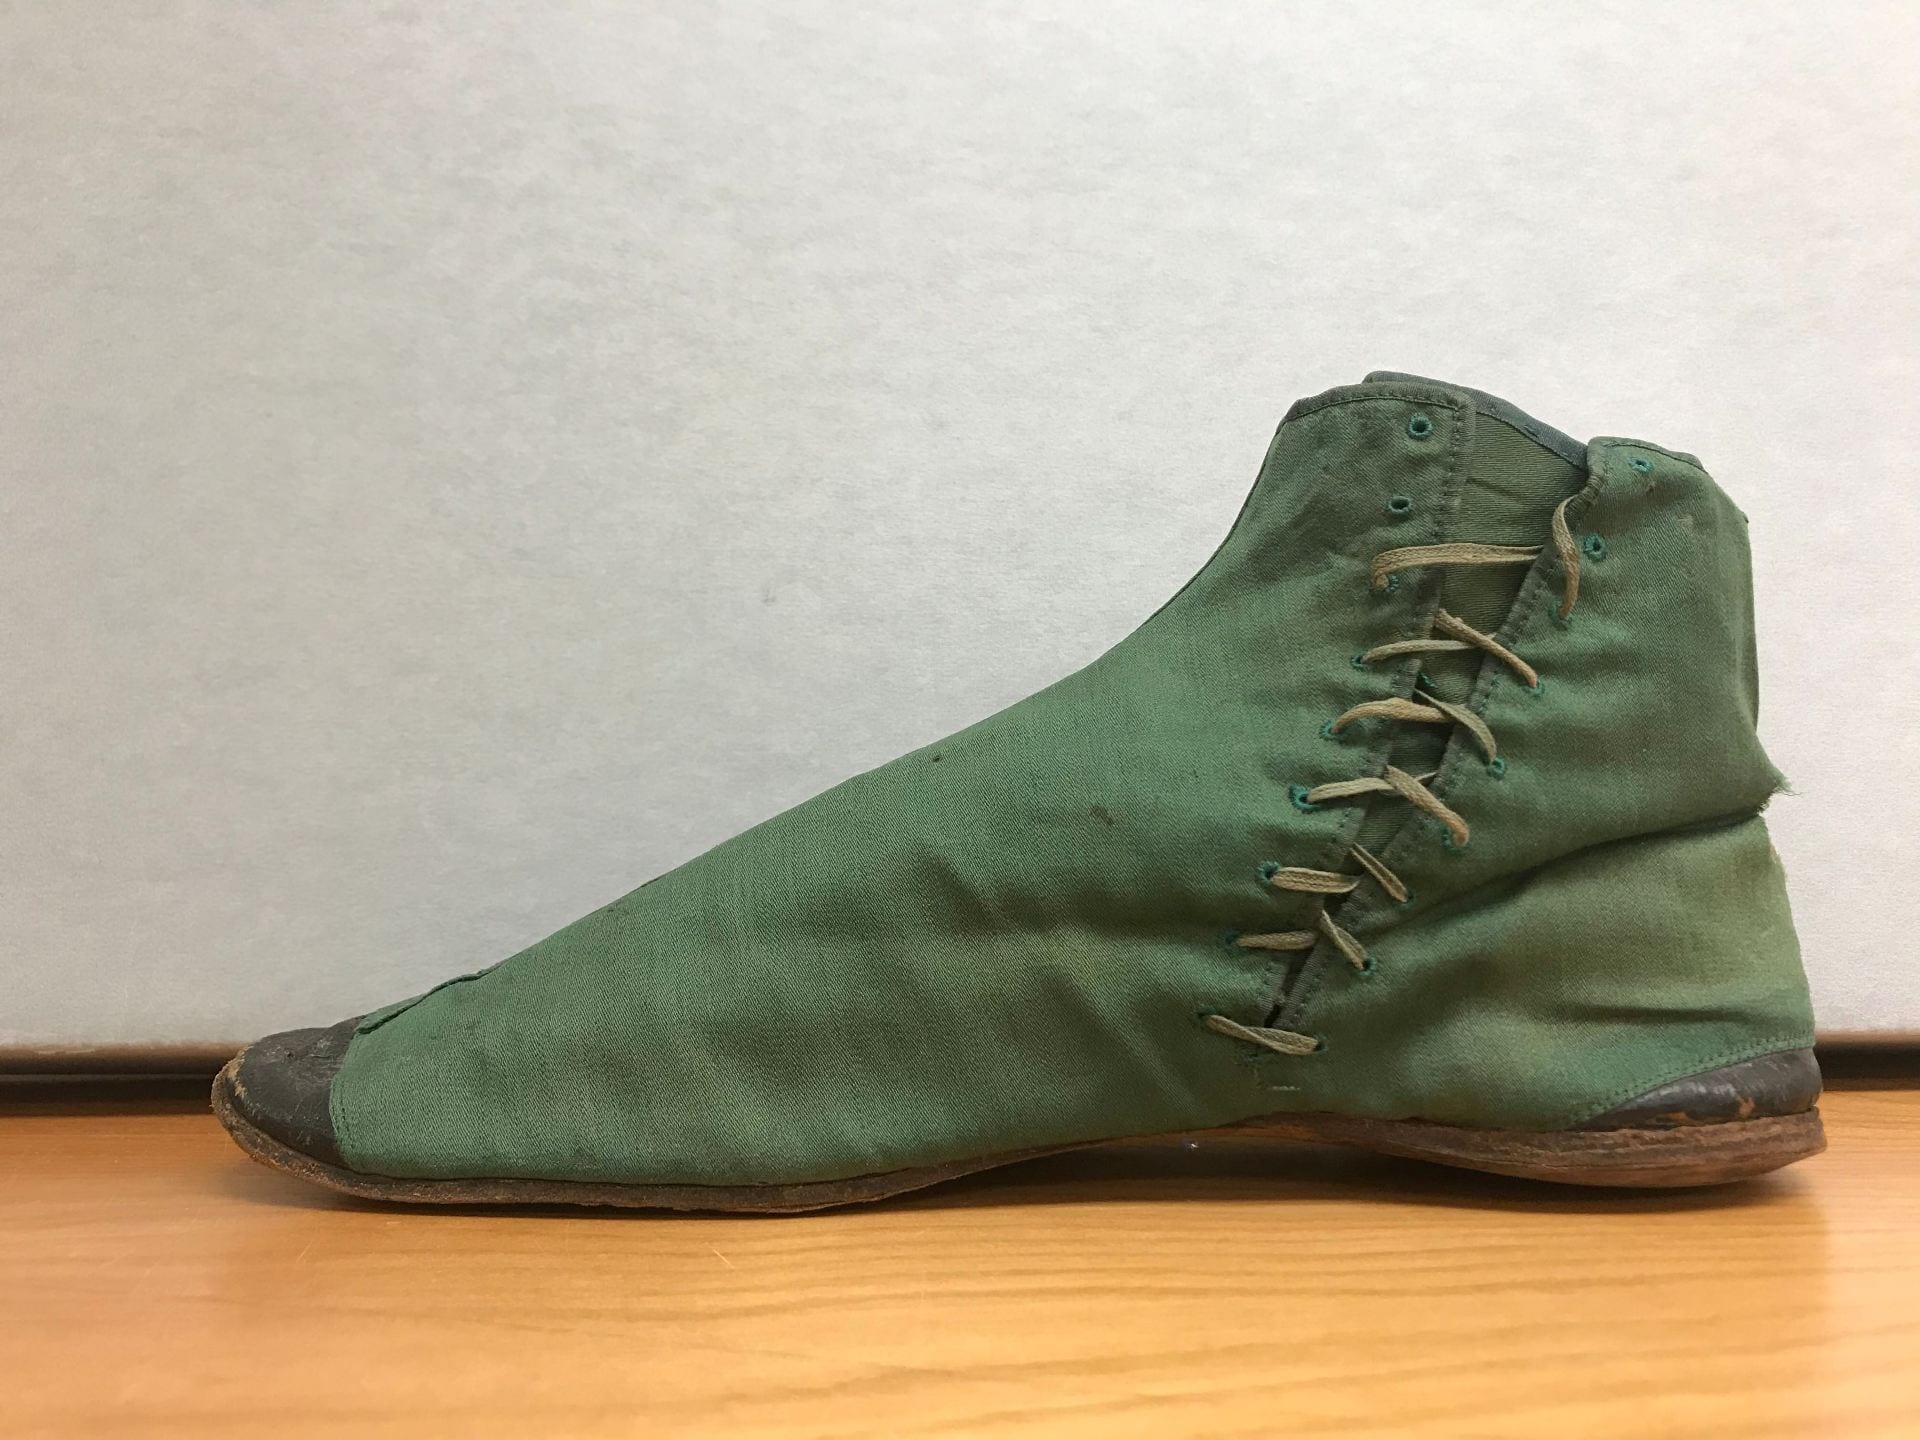 Stepping Out: A Pair of 1820's Ladies' Half Boots | Material Matters